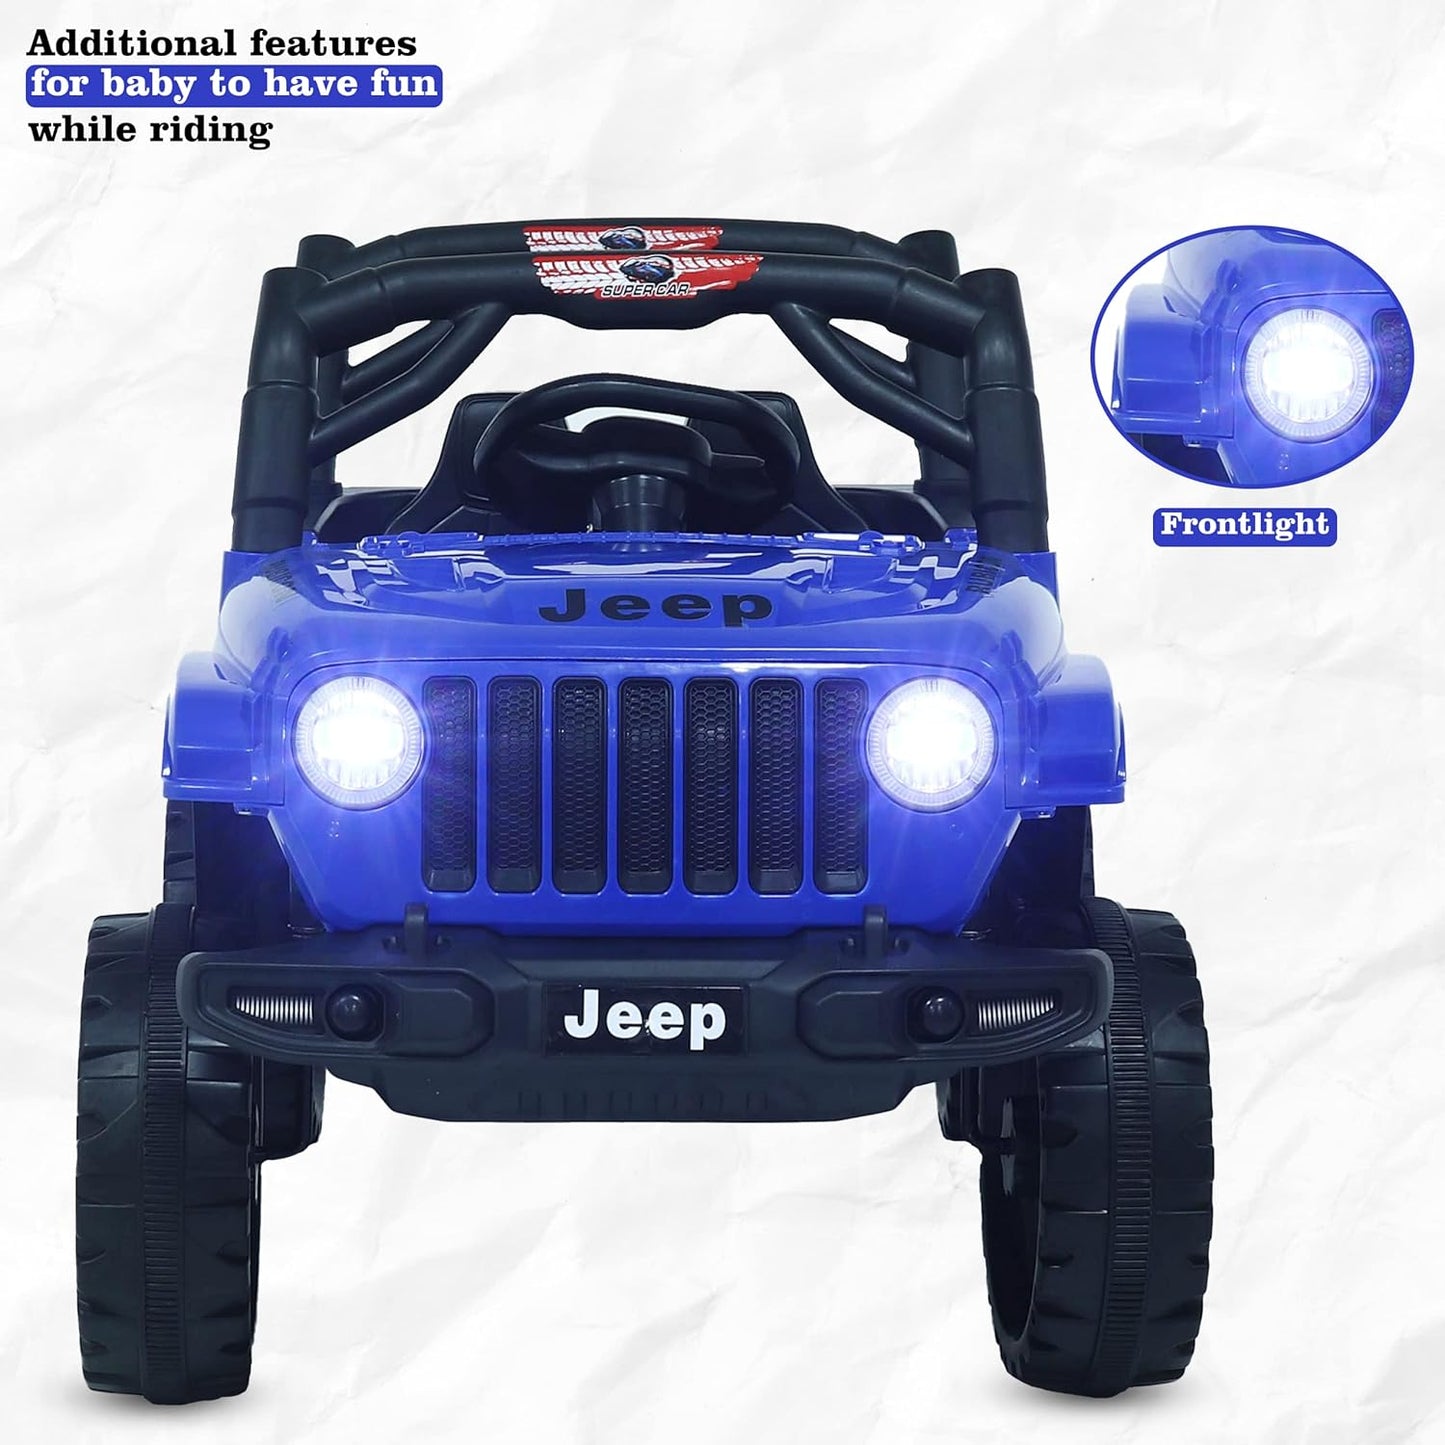 GettBoles 908 Electric Ride on Jeep for Kids with Music, Led Lights, Swing, Bluetooth Remote and 12V Battery Operated Car for1 to 4 Years Children to Drive (Blue)